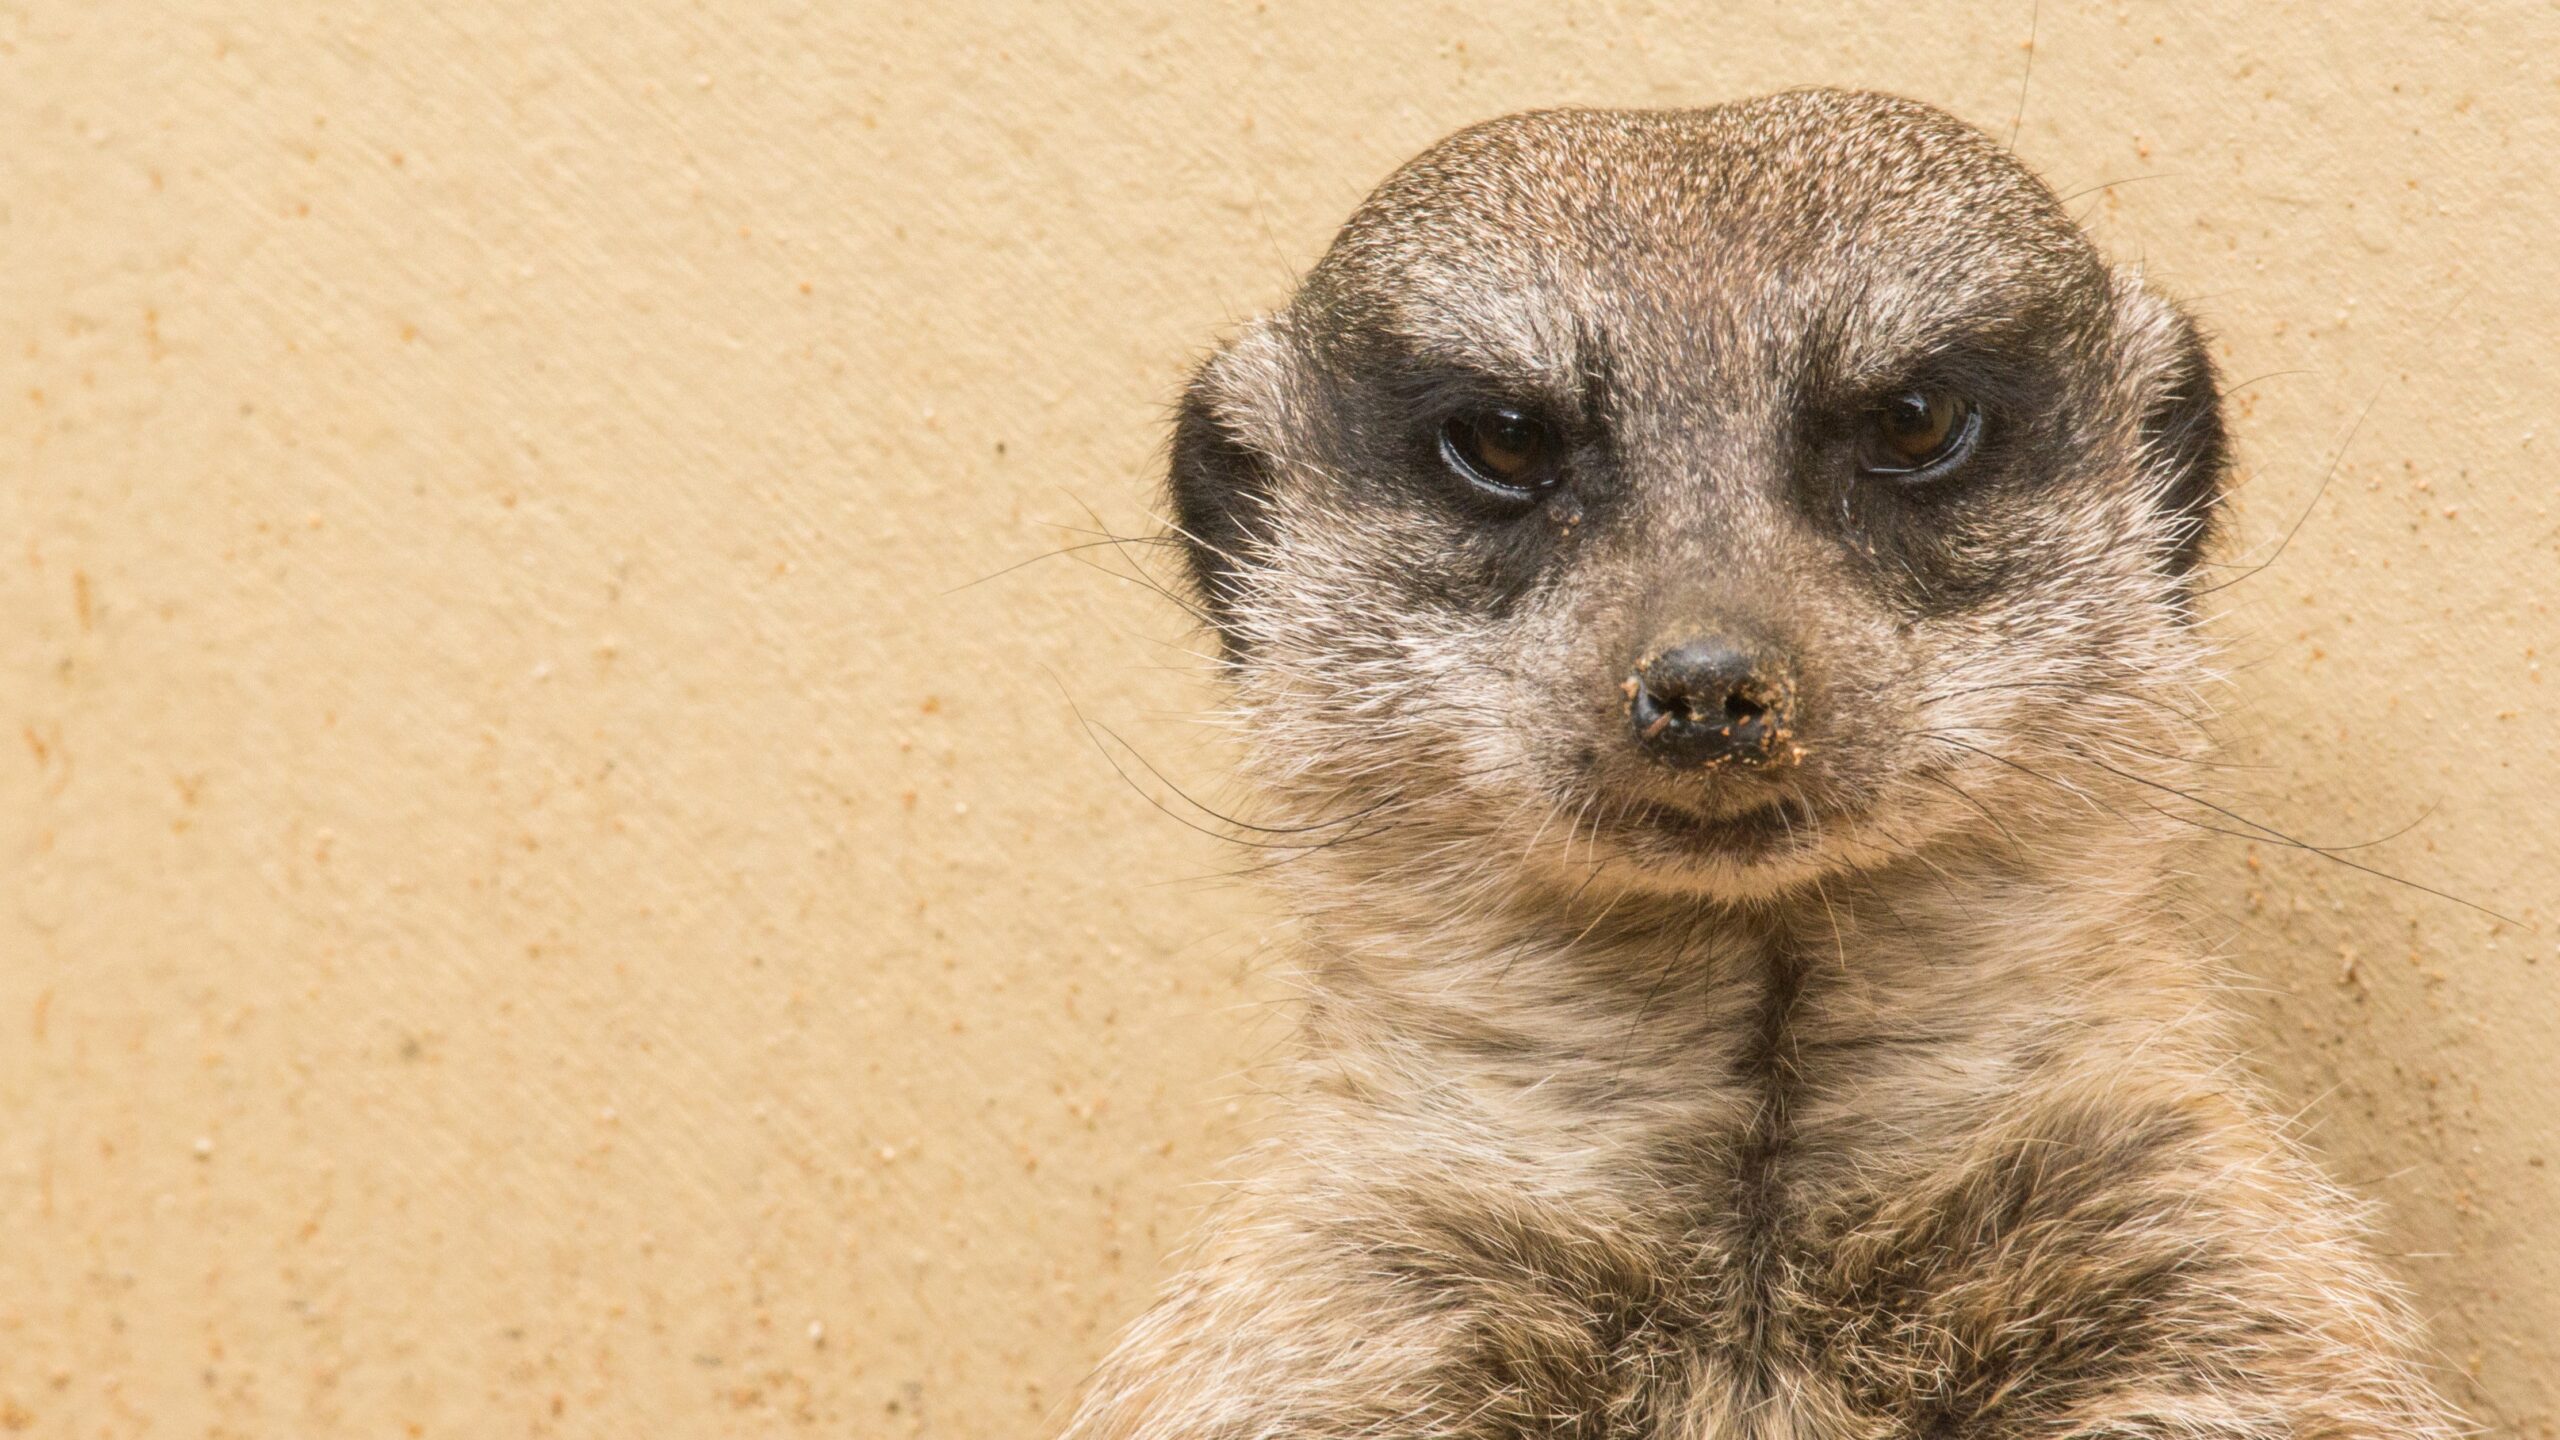 Some female meerkats have a brutal, bloodthirsty streak, and now we may know why